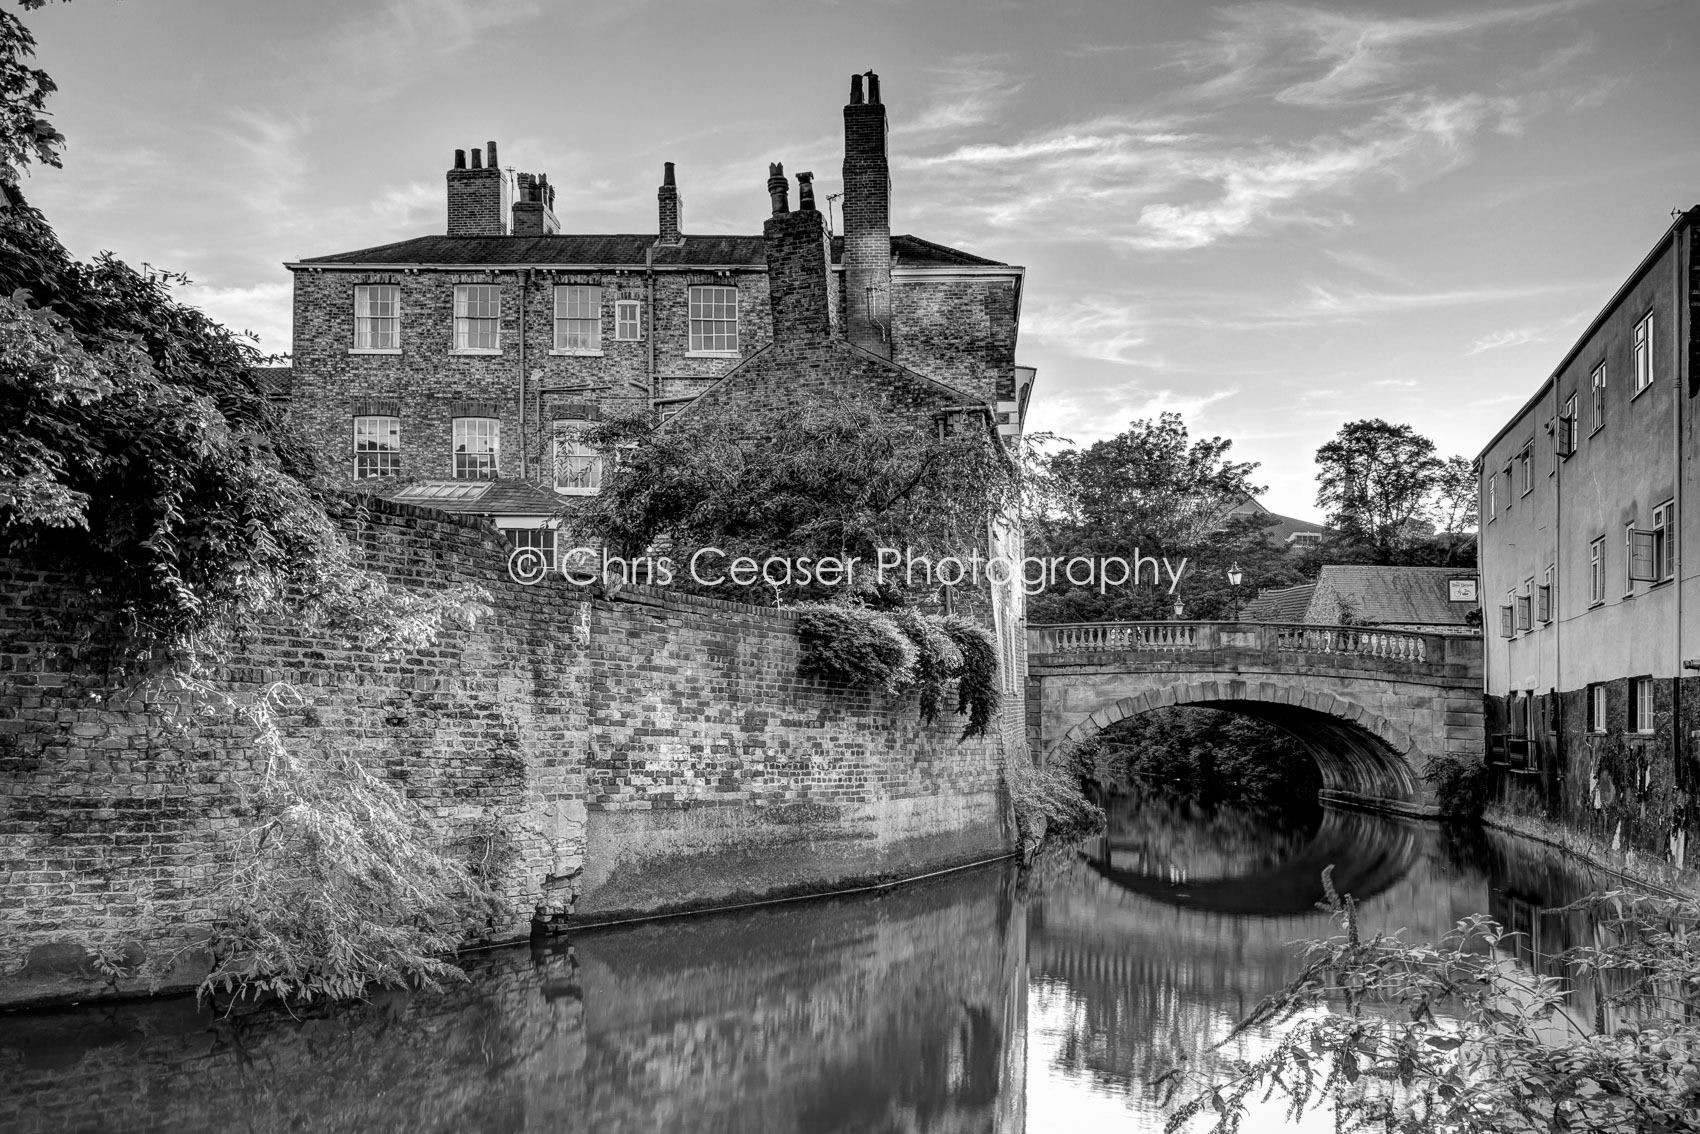 Down By The Foss, York - Chris Ceaser Photography